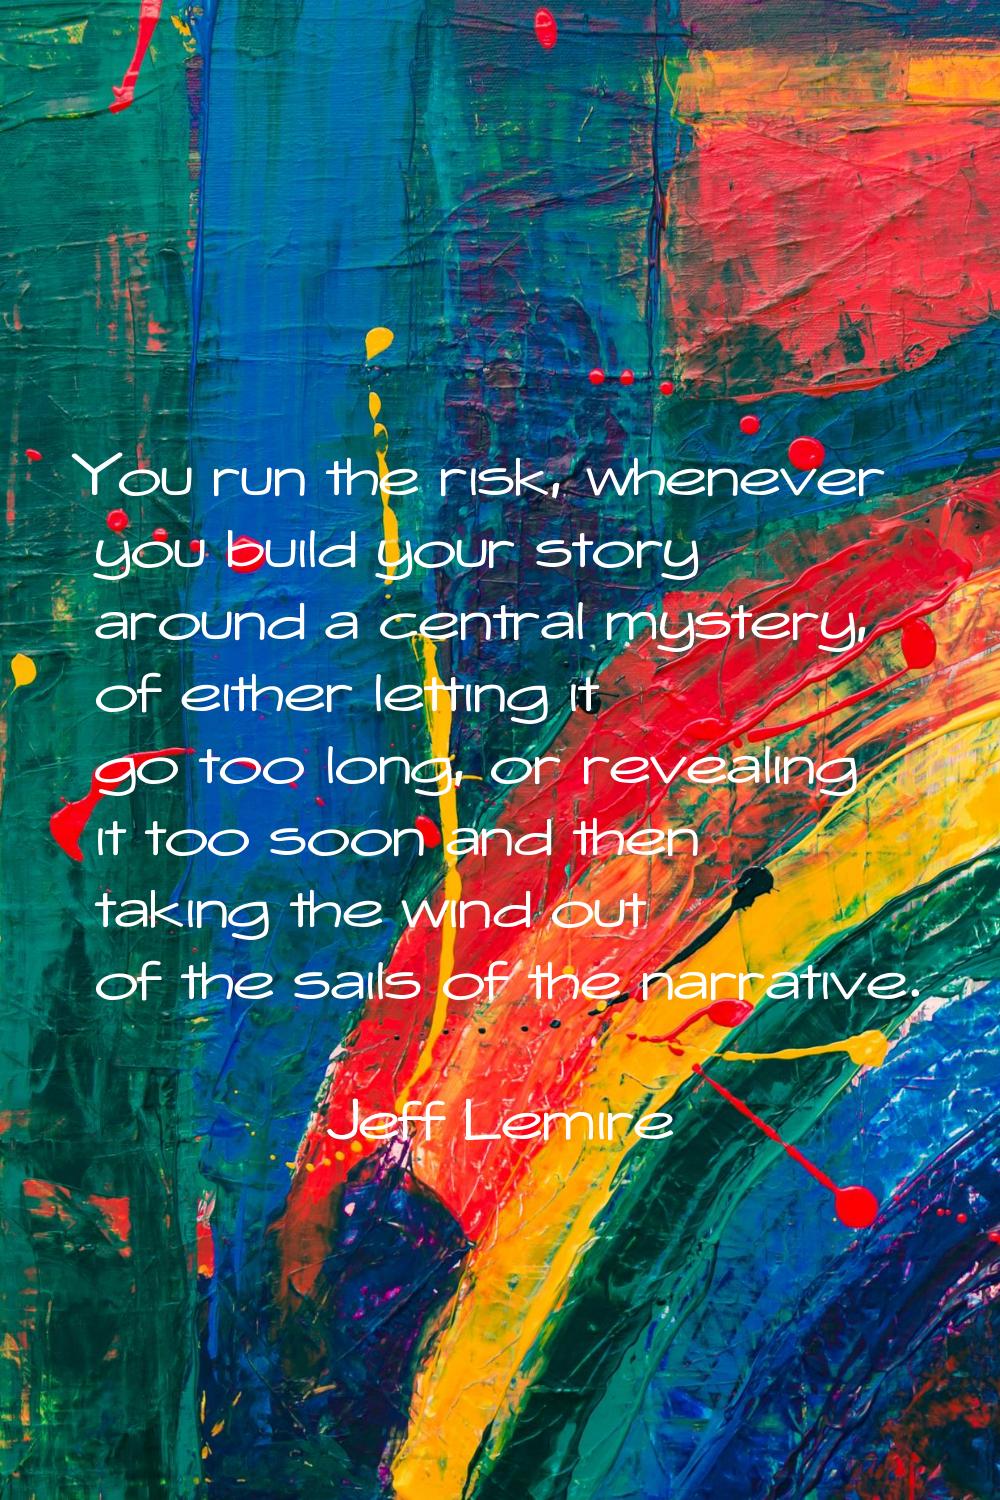 You run the risk, whenever you build your story around a central mystery, of either letting it go t